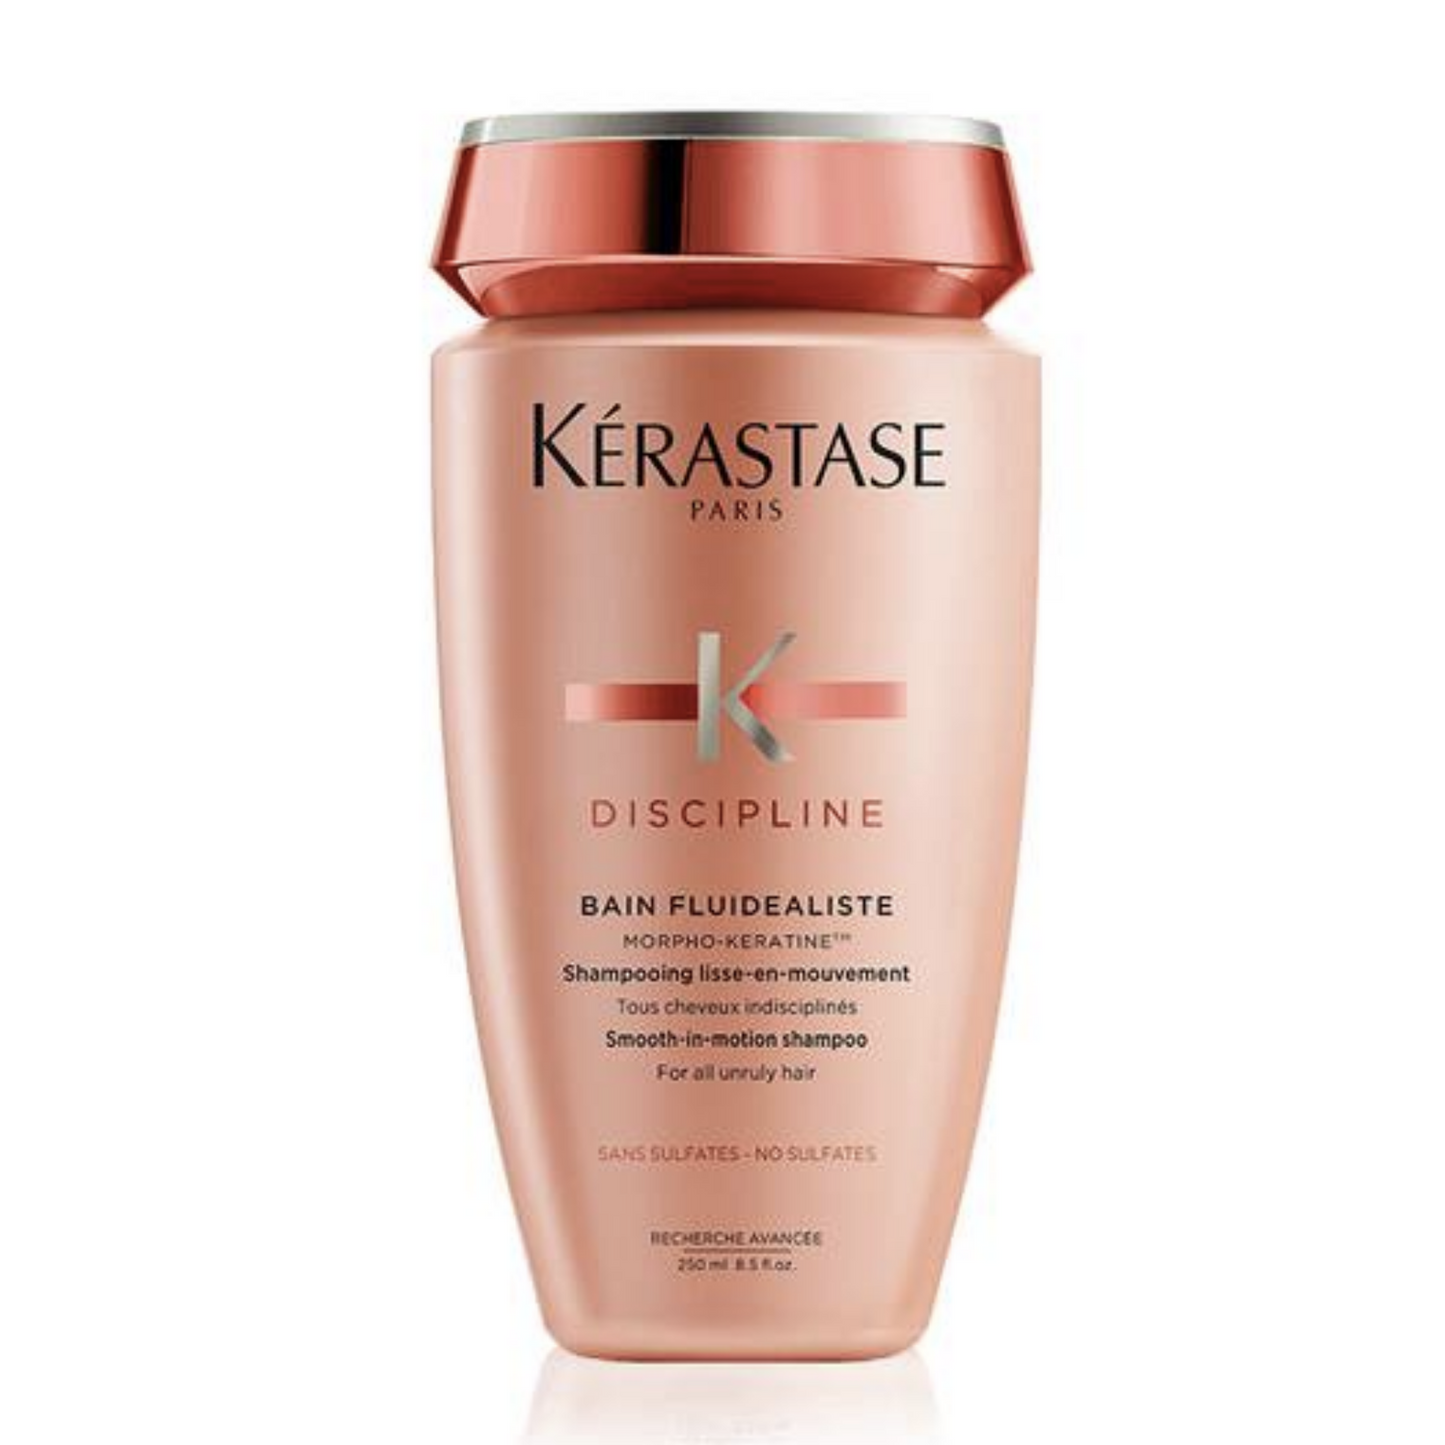 Bain Fluidealiste Shampoo SF- Sulfate free. Transforms frizzy hair into soft, smooth hair. Delivers optimal hair nourishment.